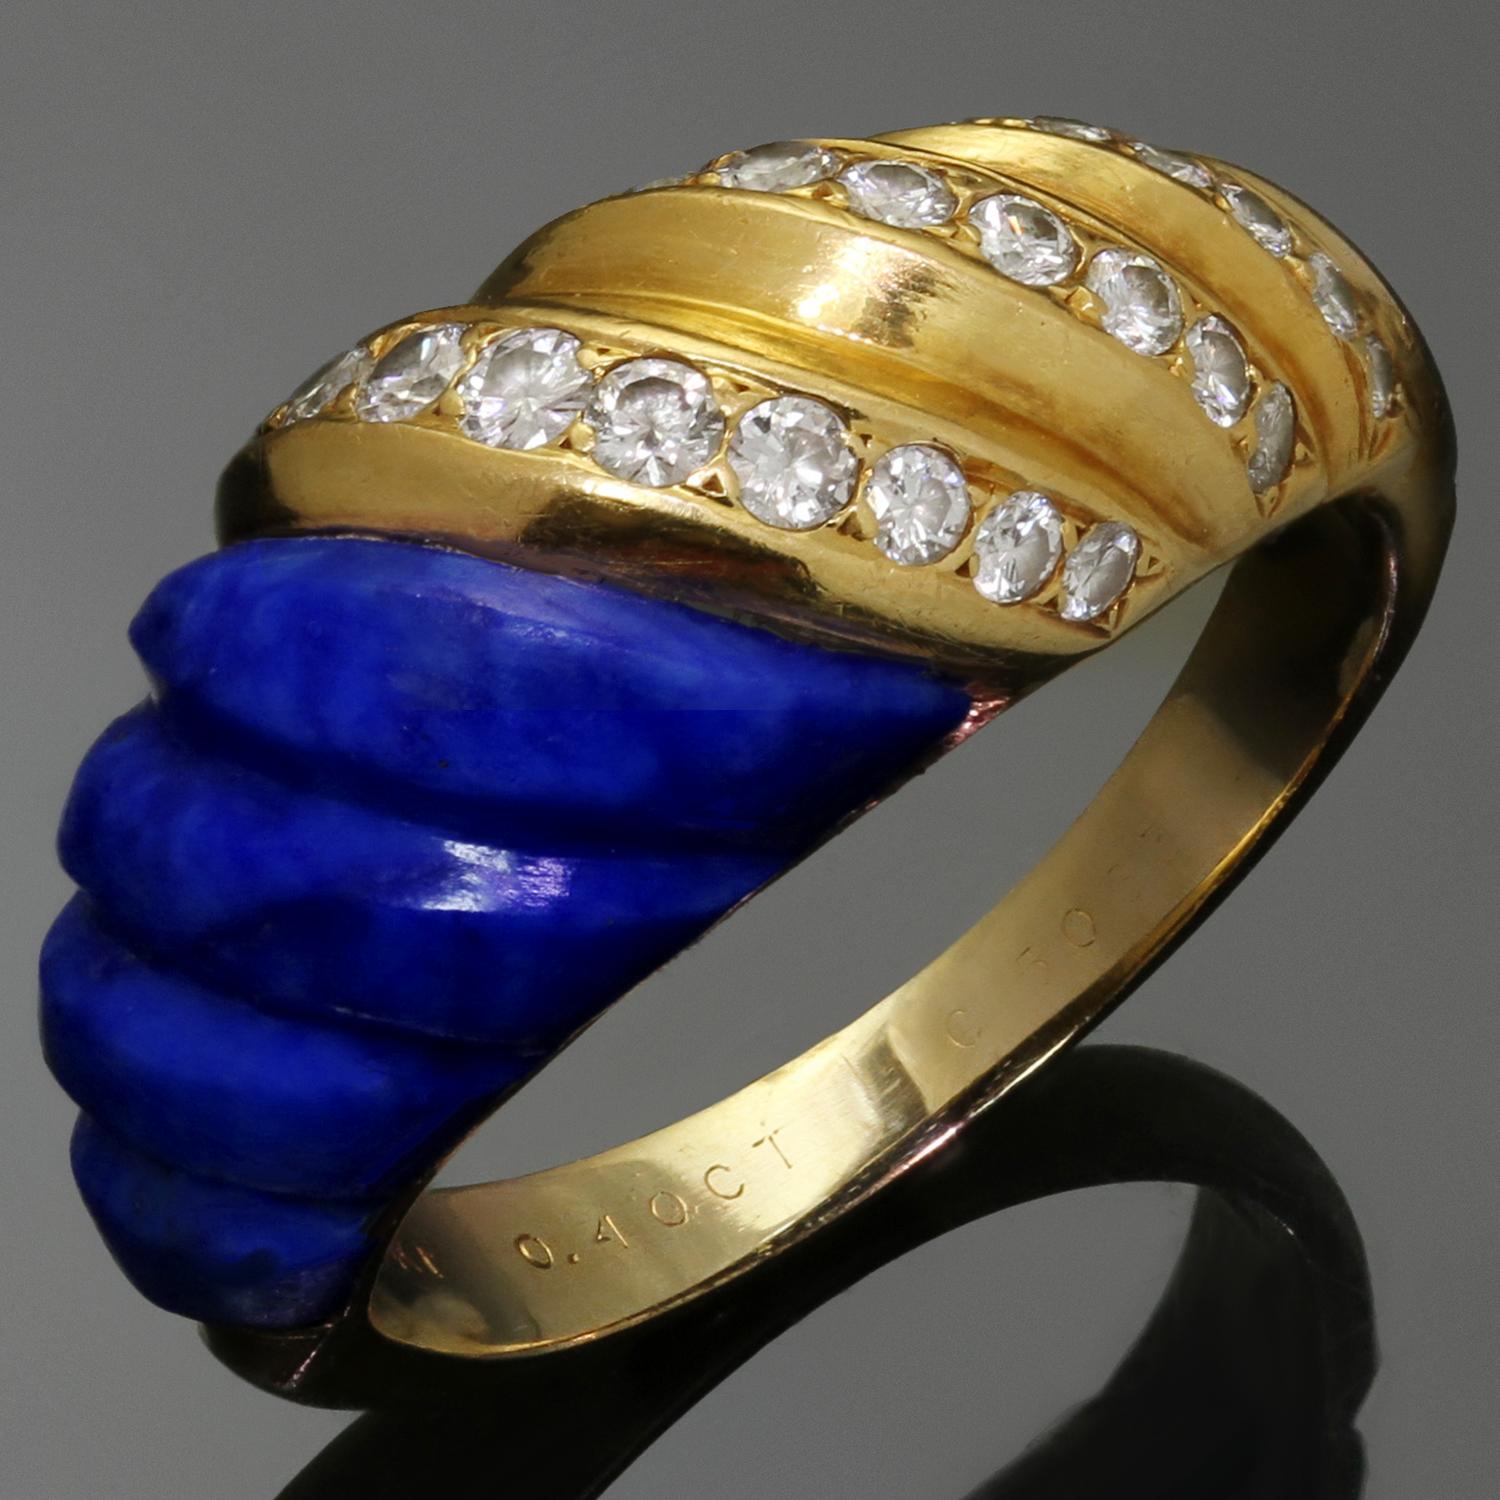 This stunning vintage Van Cleef & Arpels ring features a fluted design crafted in 18k yellow gold and set with fluted lapiz lazuli and round brilliant-cut F-G-H VS1-VS2 diamonds weighing an estimated 0.40 carats in 18k yellow gold. Made in France